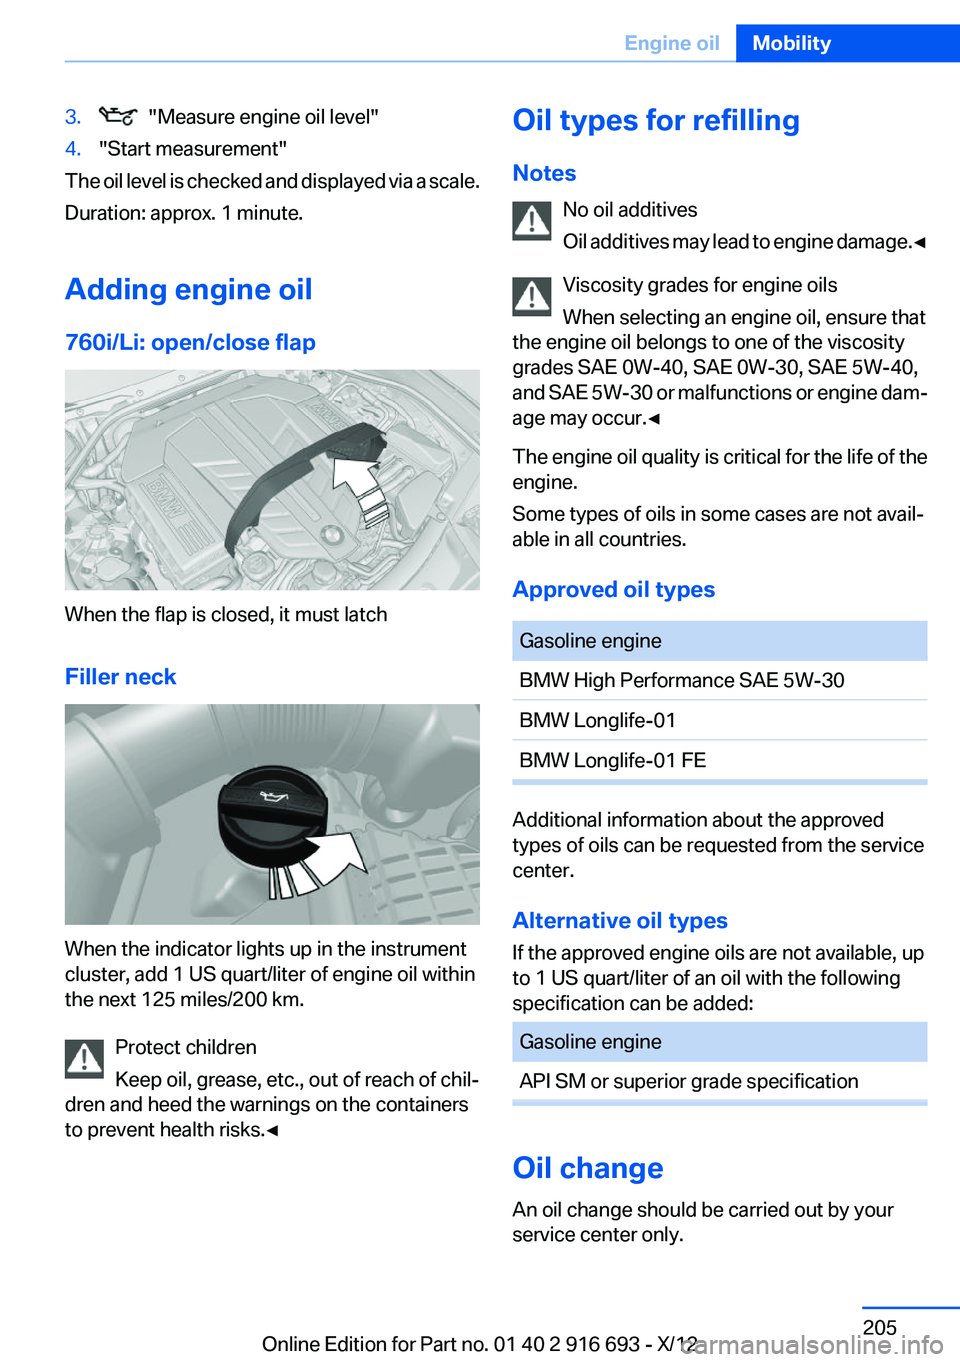 BMW 750LI 2013  Owners Manual 3.  "Measure engine oil level"4."Start measurement"
The oil level is checked and displayed via a scale.
Duration: approx. 1 minute.
Adding engine oil
760i/Li: open/close flap
When the 